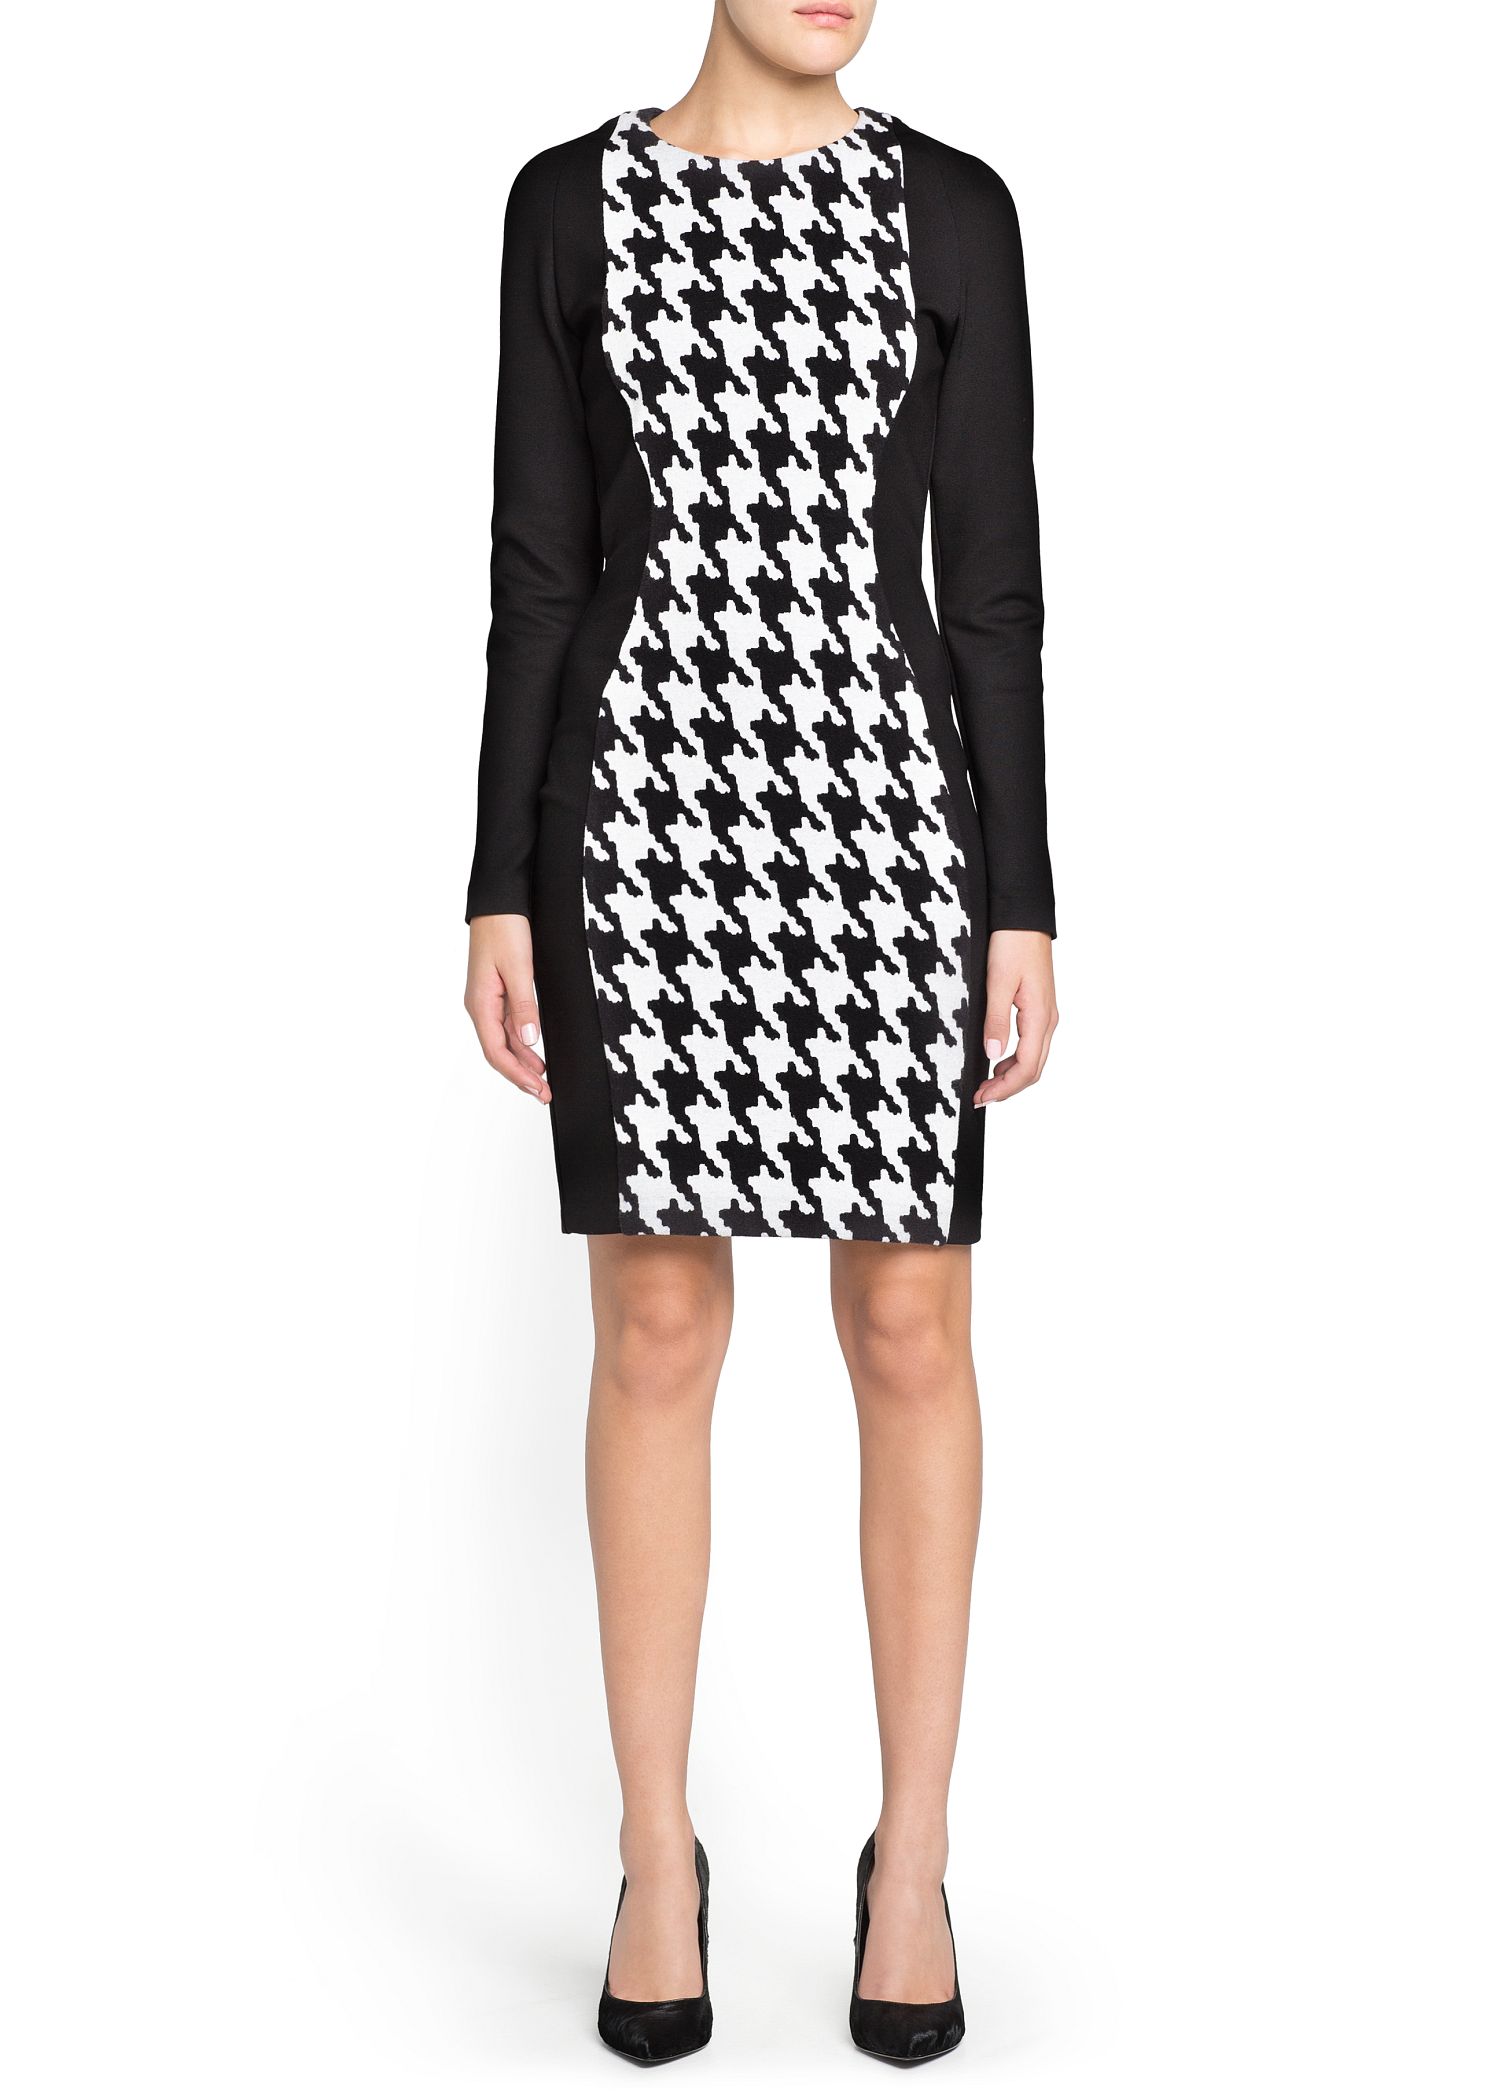 Lyst - Mango Pencil Houndstooth Dress in White